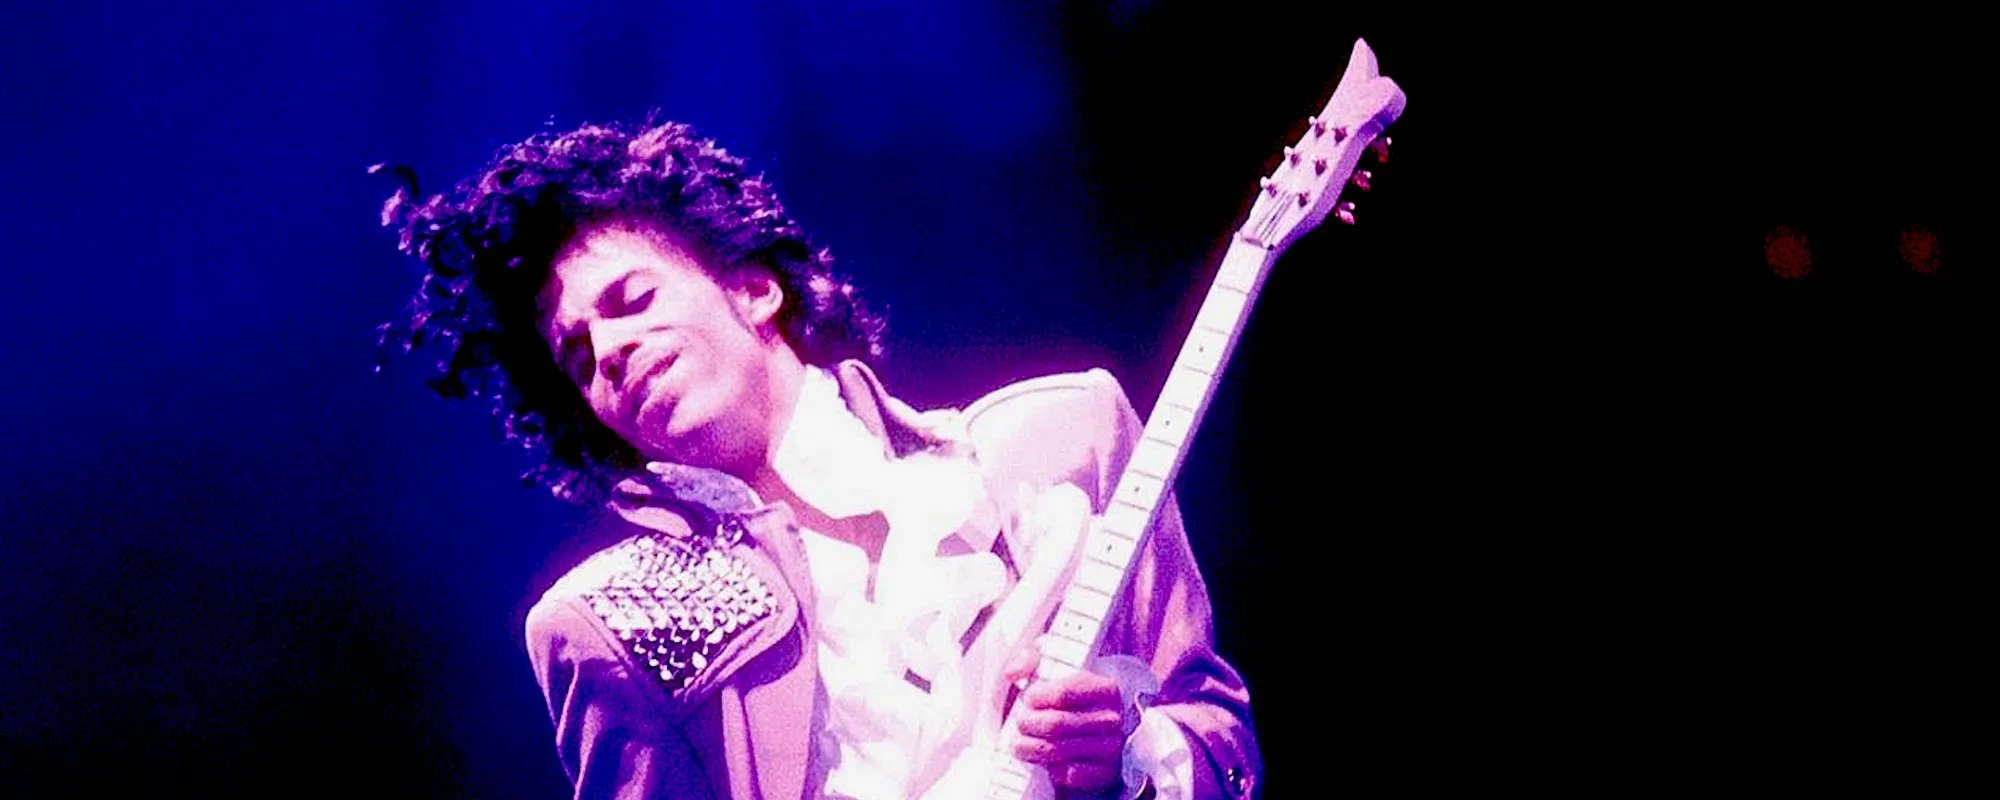 Behind the Meaning of “Purple Rain” by Prince